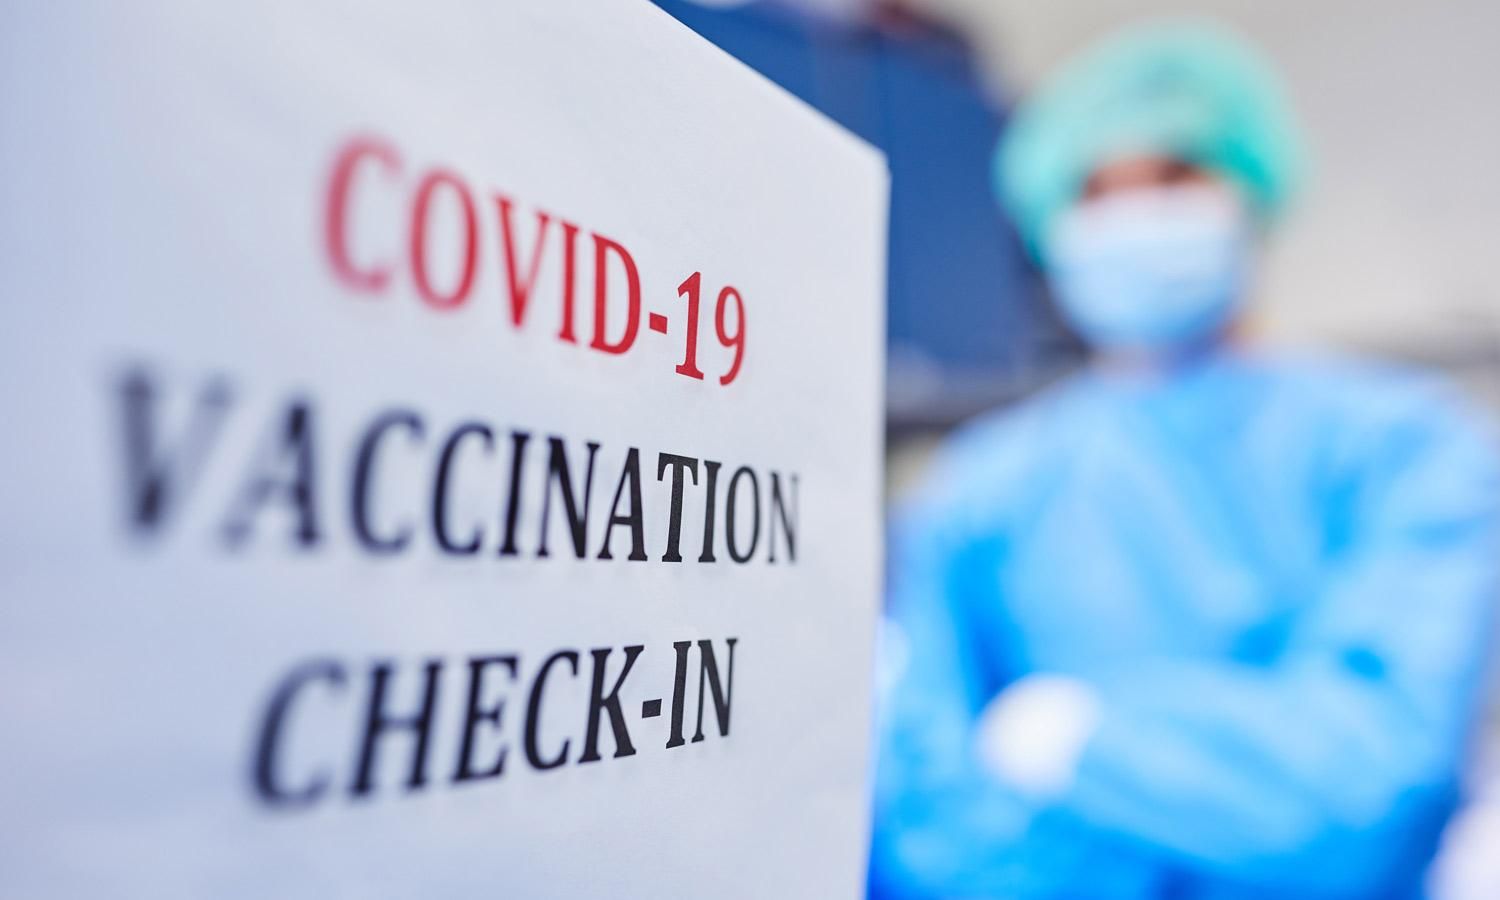 Scientists estimate that herd immunity, the point at which the coronavirus runs out of people to infect, would be achieved at a vaccination level of between 70 and 90 percent. (Photo: Robert Kneschke/Shutterstock)